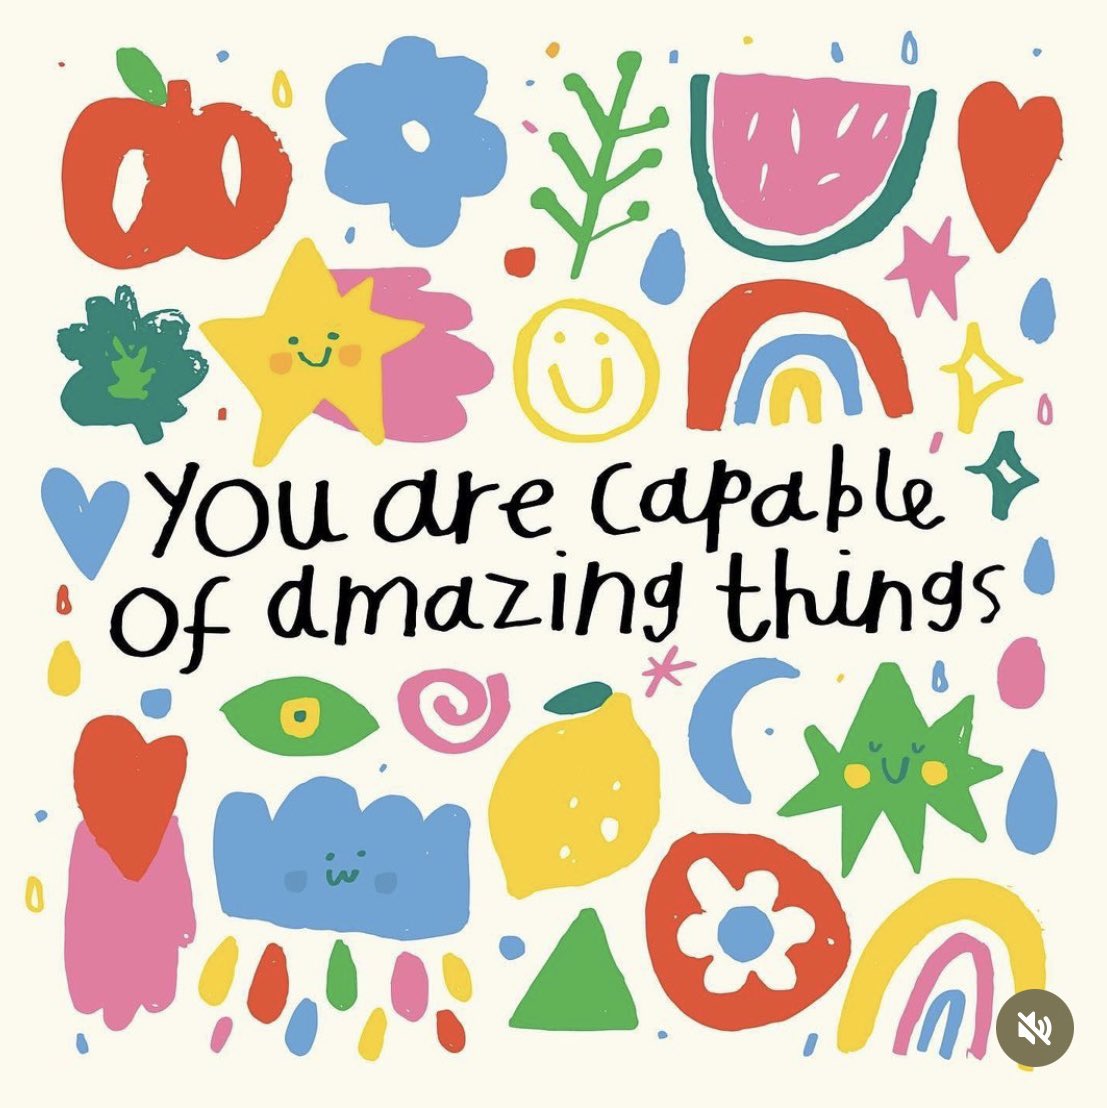 Remember: You are capable of amazing things Image: @nikkimiles_